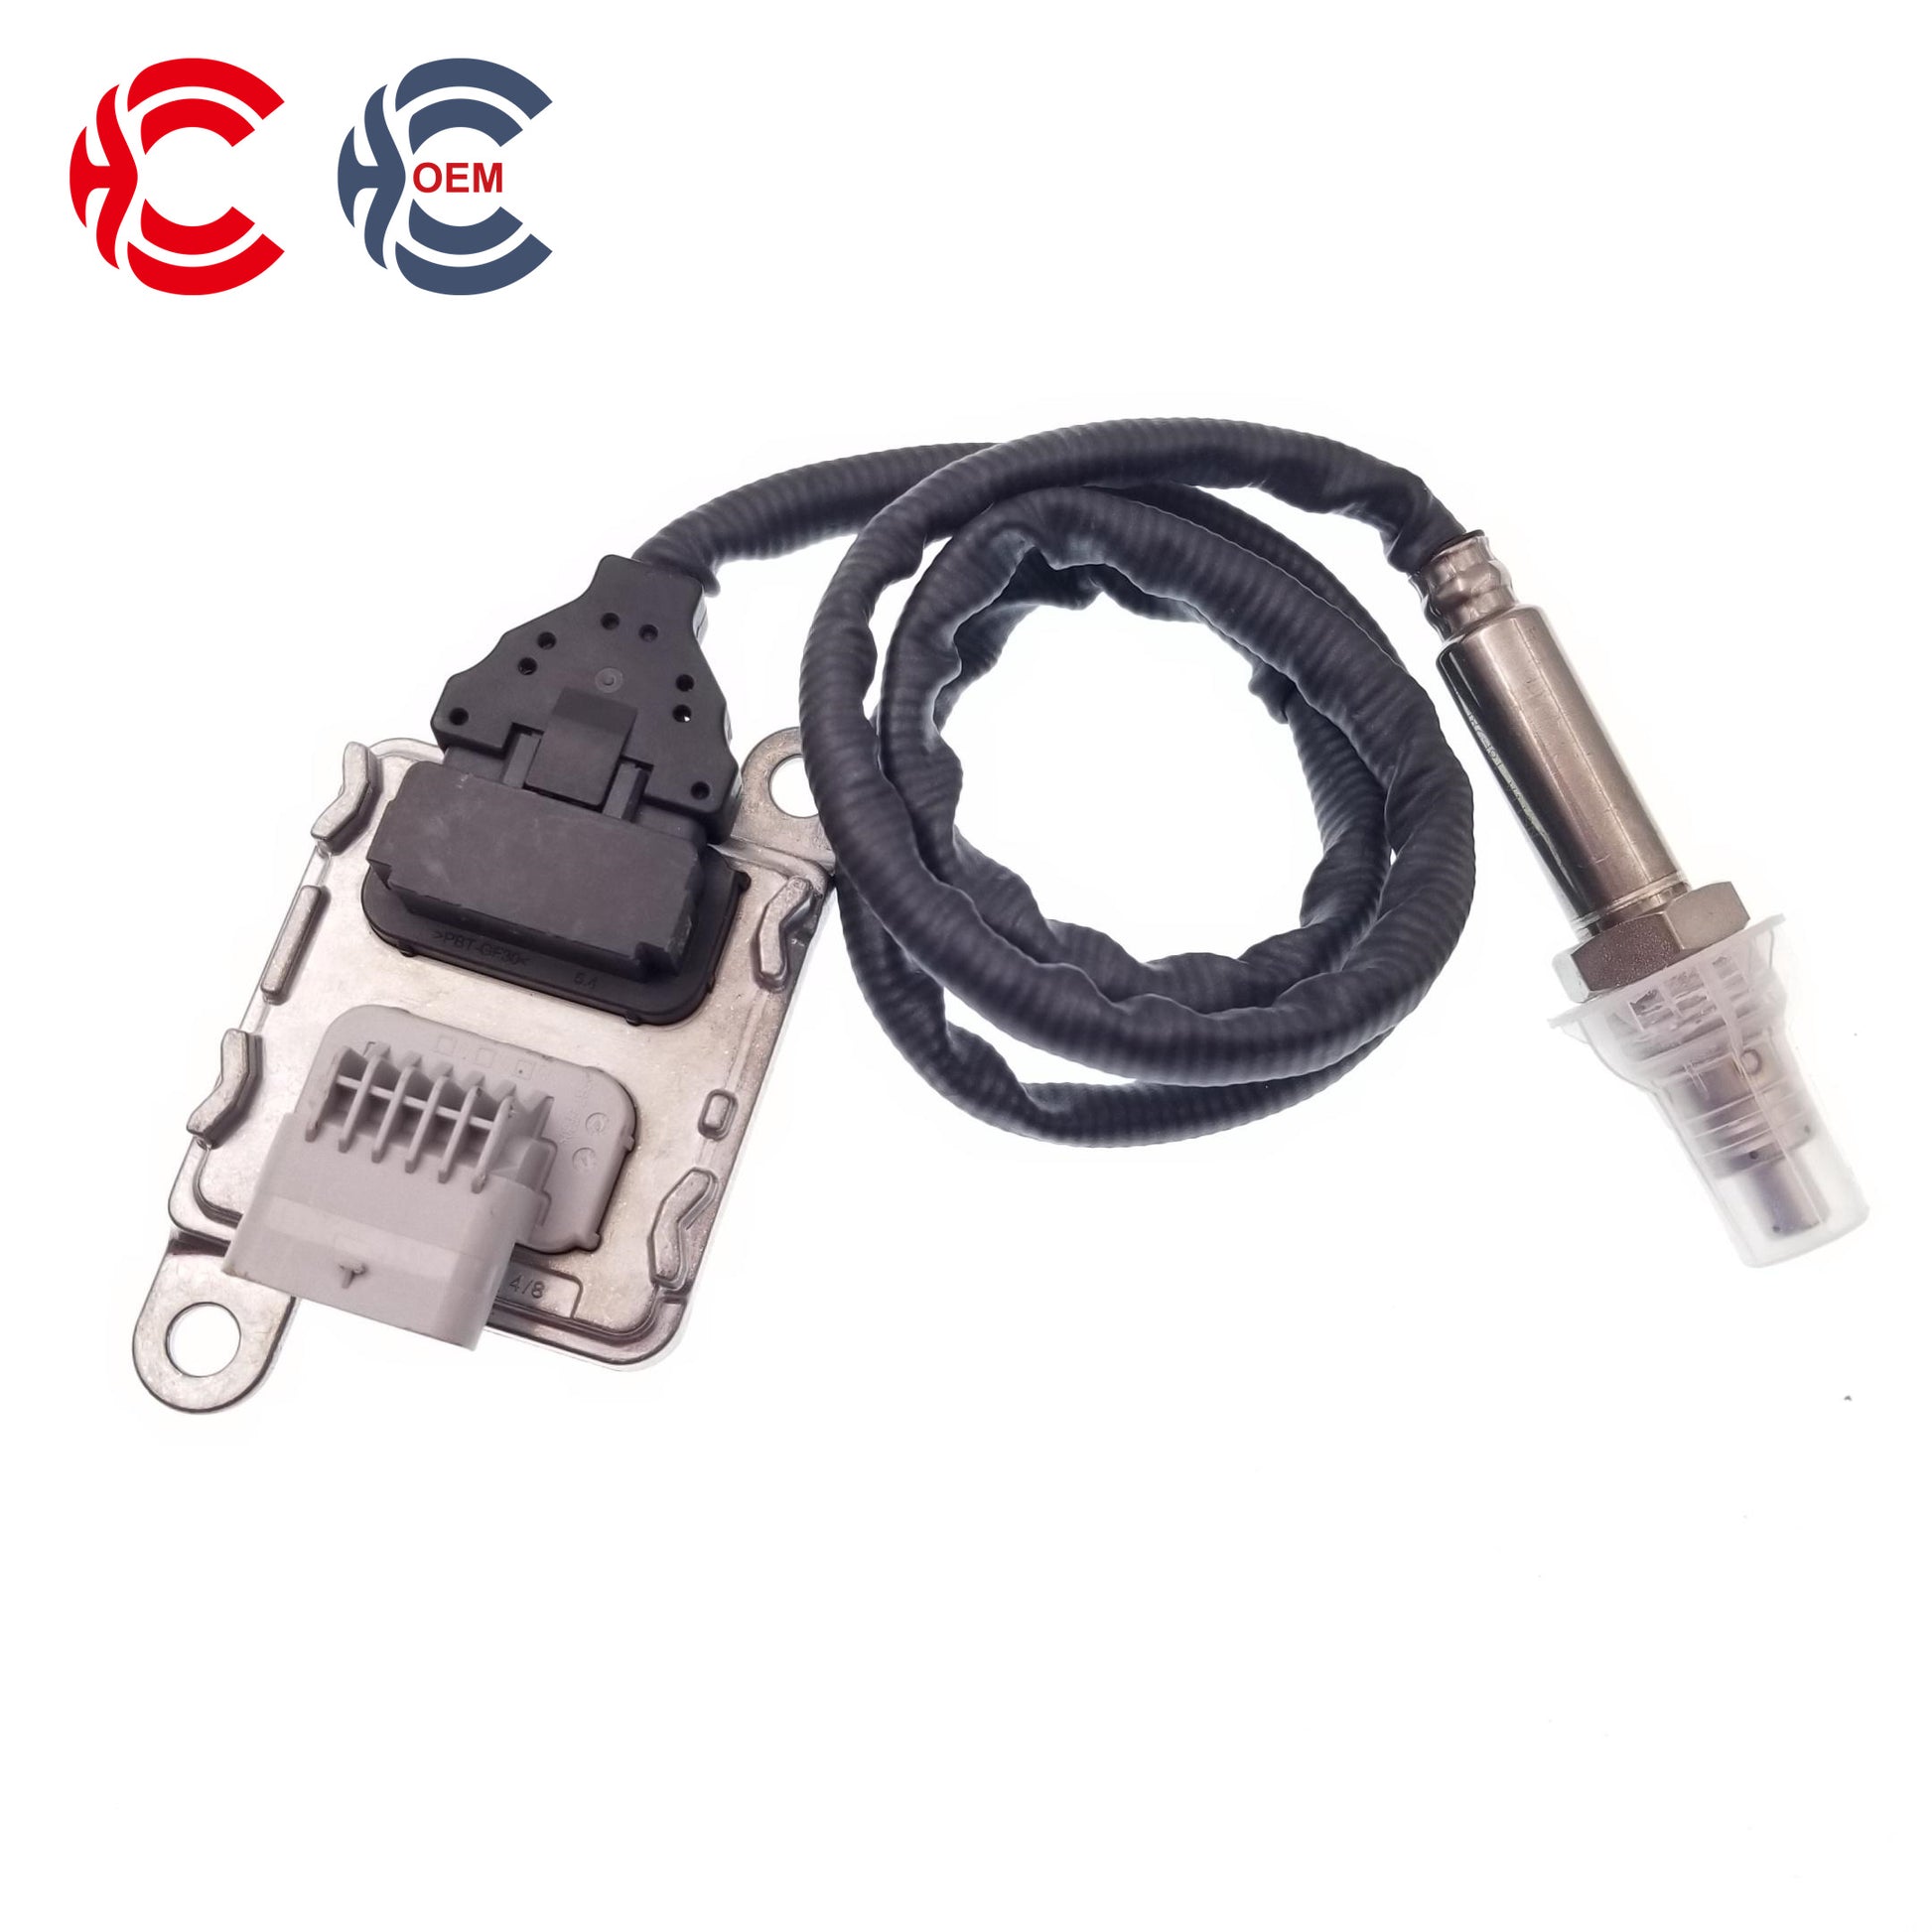 OEM: SNS 0916 12695882Material: ABS metalColor: black silverOrigin: Made in ChinaWeight: 400gPacking List: 1* Nitrogen oxide sensor NOx More ServiceWe can provide OEM Manufacturing serviceWe can Be your one-step solution for Auto PartsWe can provide technical scheme for you Feel Free to Contact Us, We will get back to you as soon as possible.